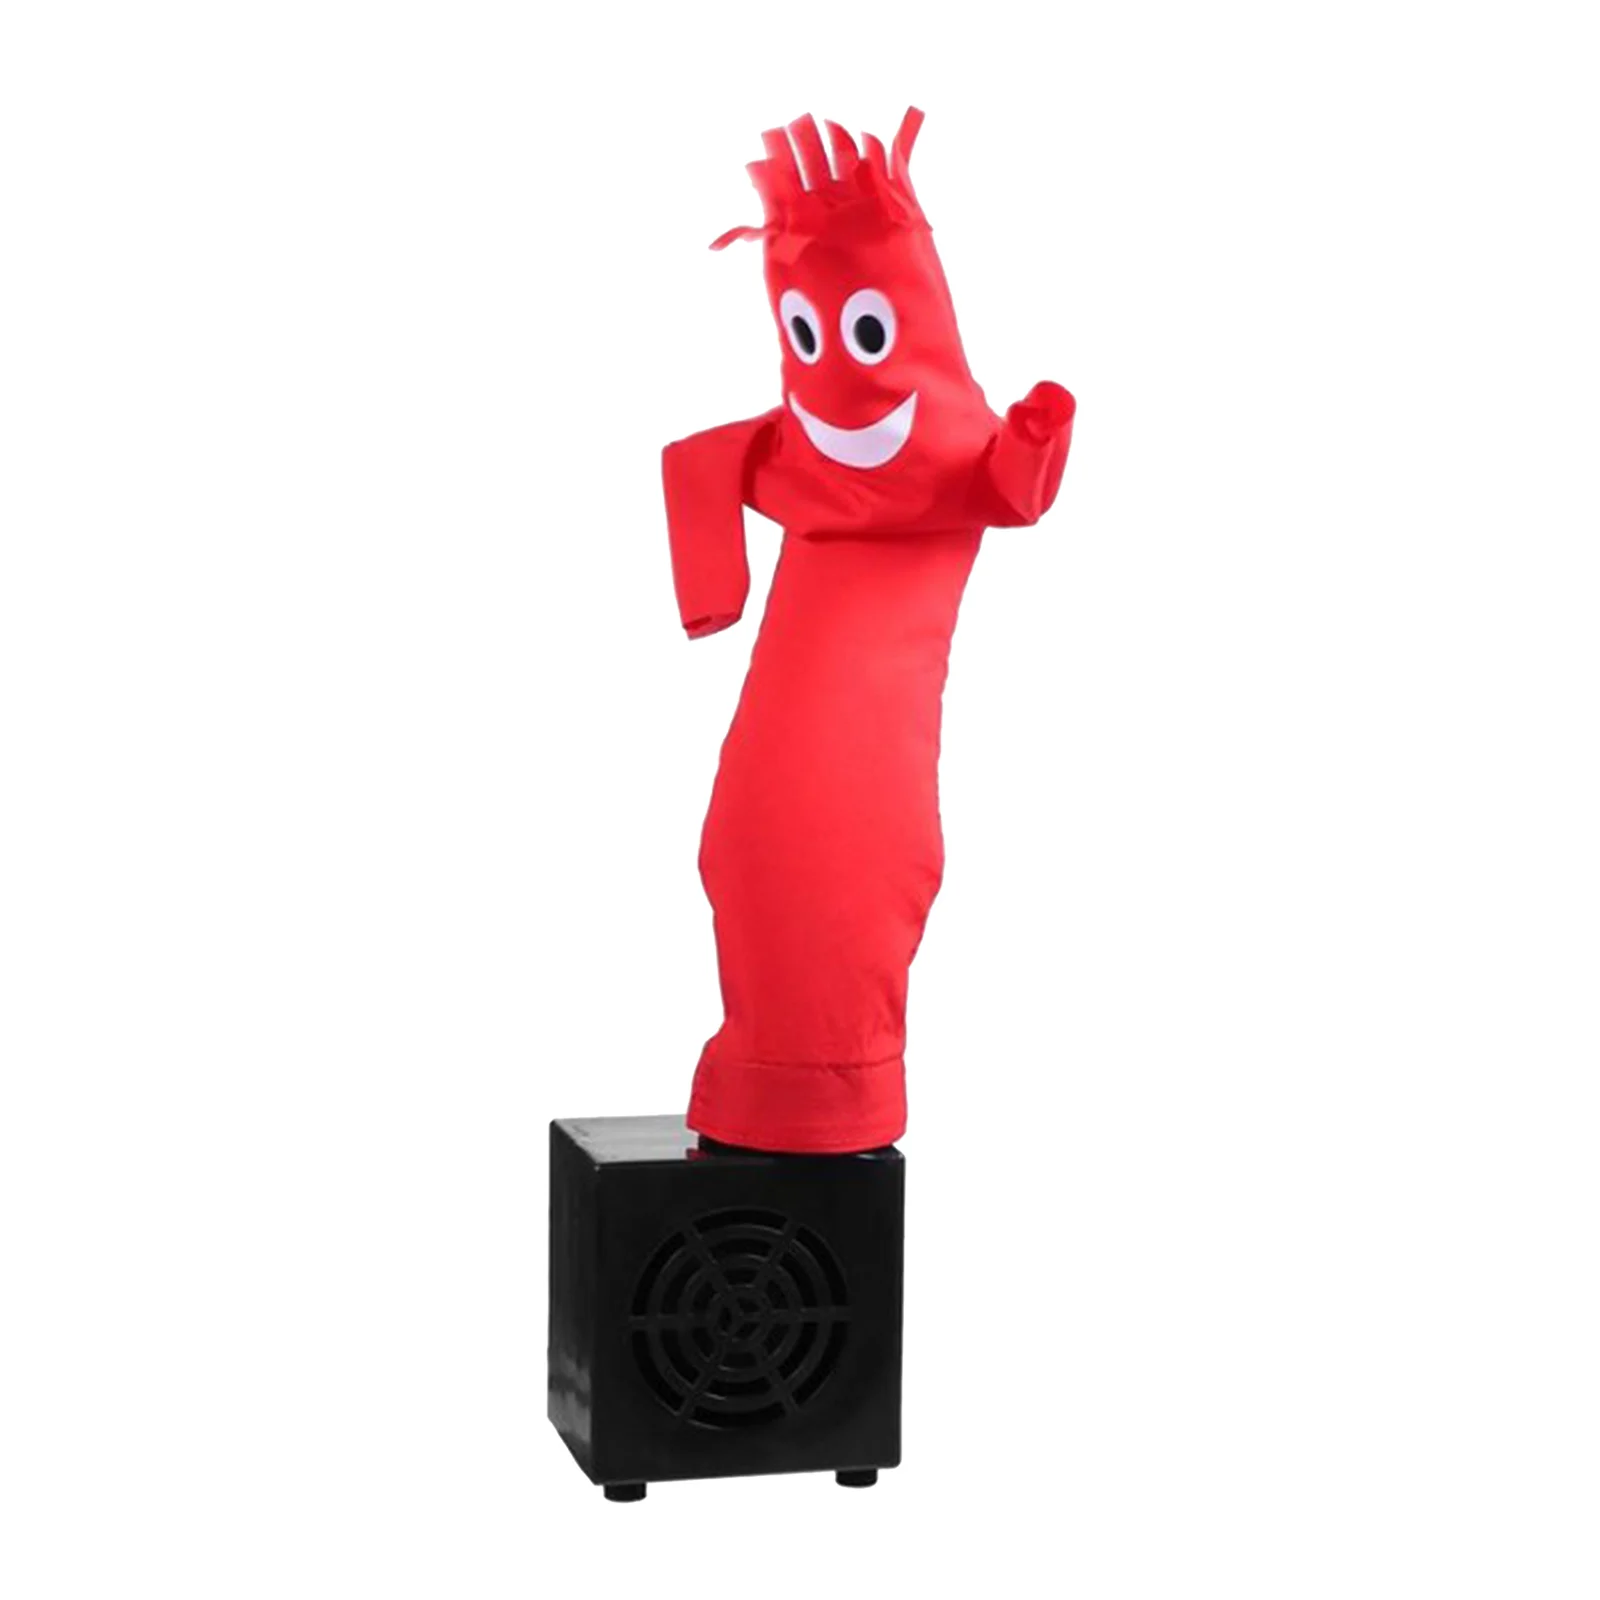 

Creative Inflatable Wacky Waving Flailing Arms Tube Guy Red Dancing Air Puppet Adorable Dancing Man Home Office Desktop Decor